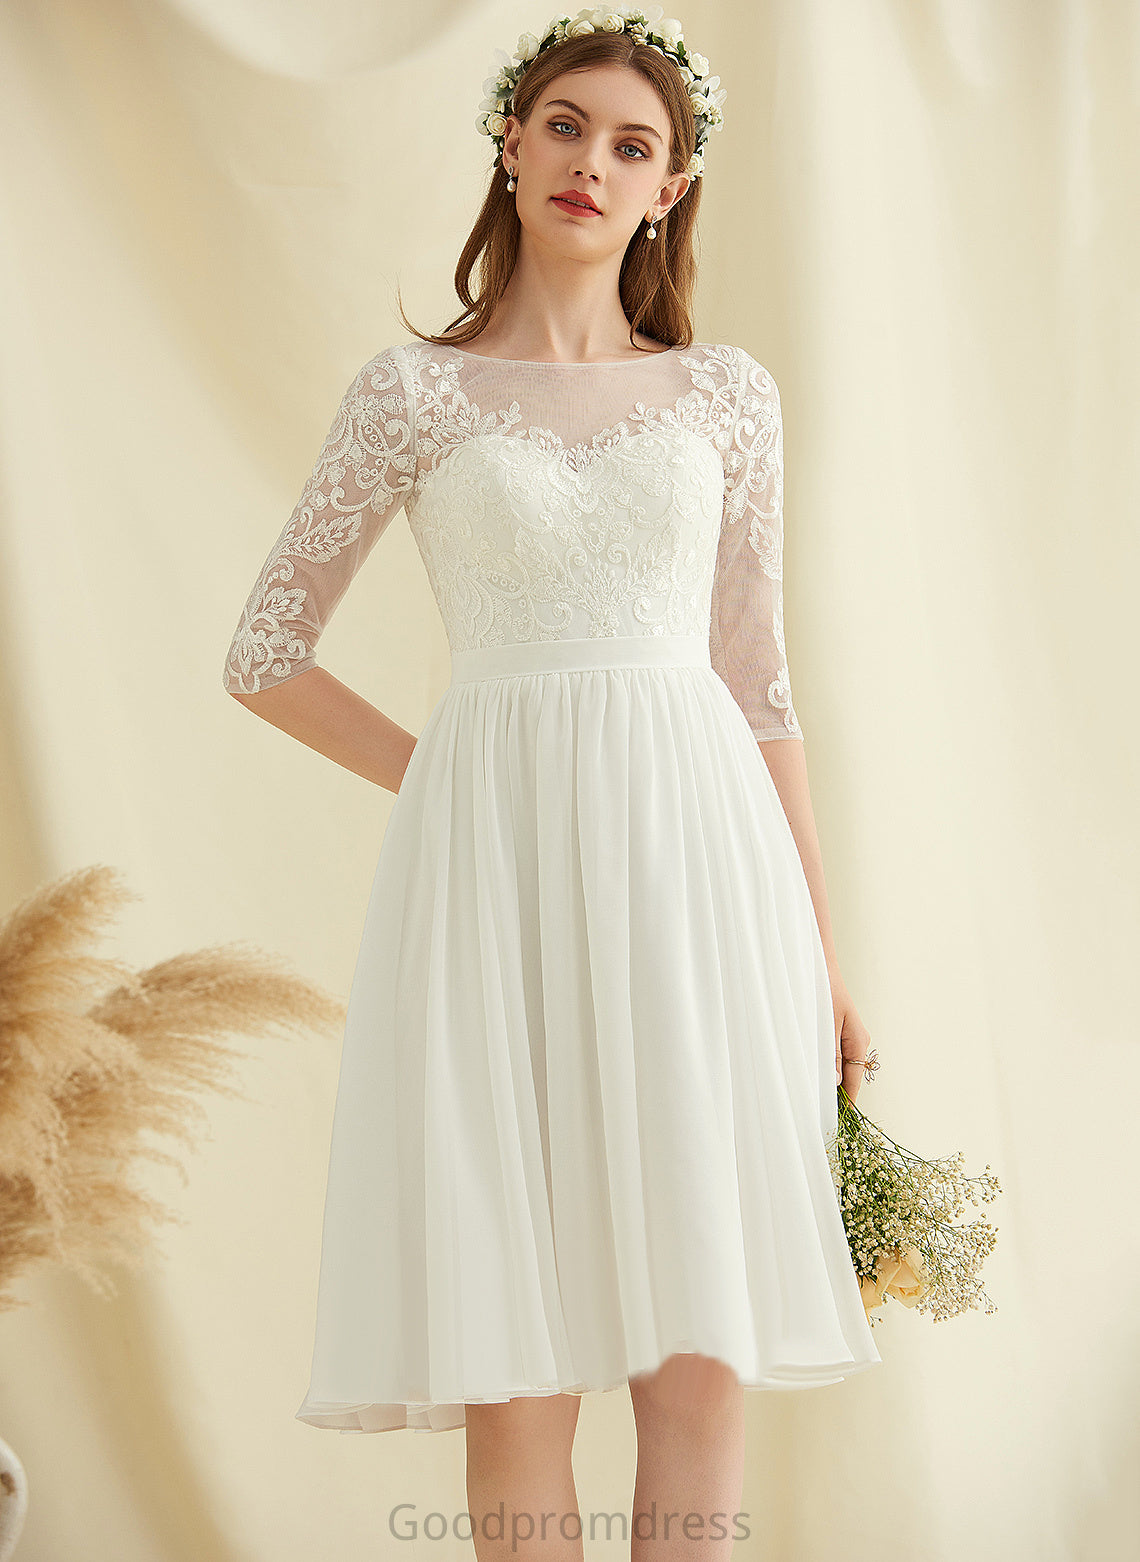 Lace Chiffon Wedding Dresses Dress Wedding Sequins Scoop Knee-Length A-Line With Jacqueline